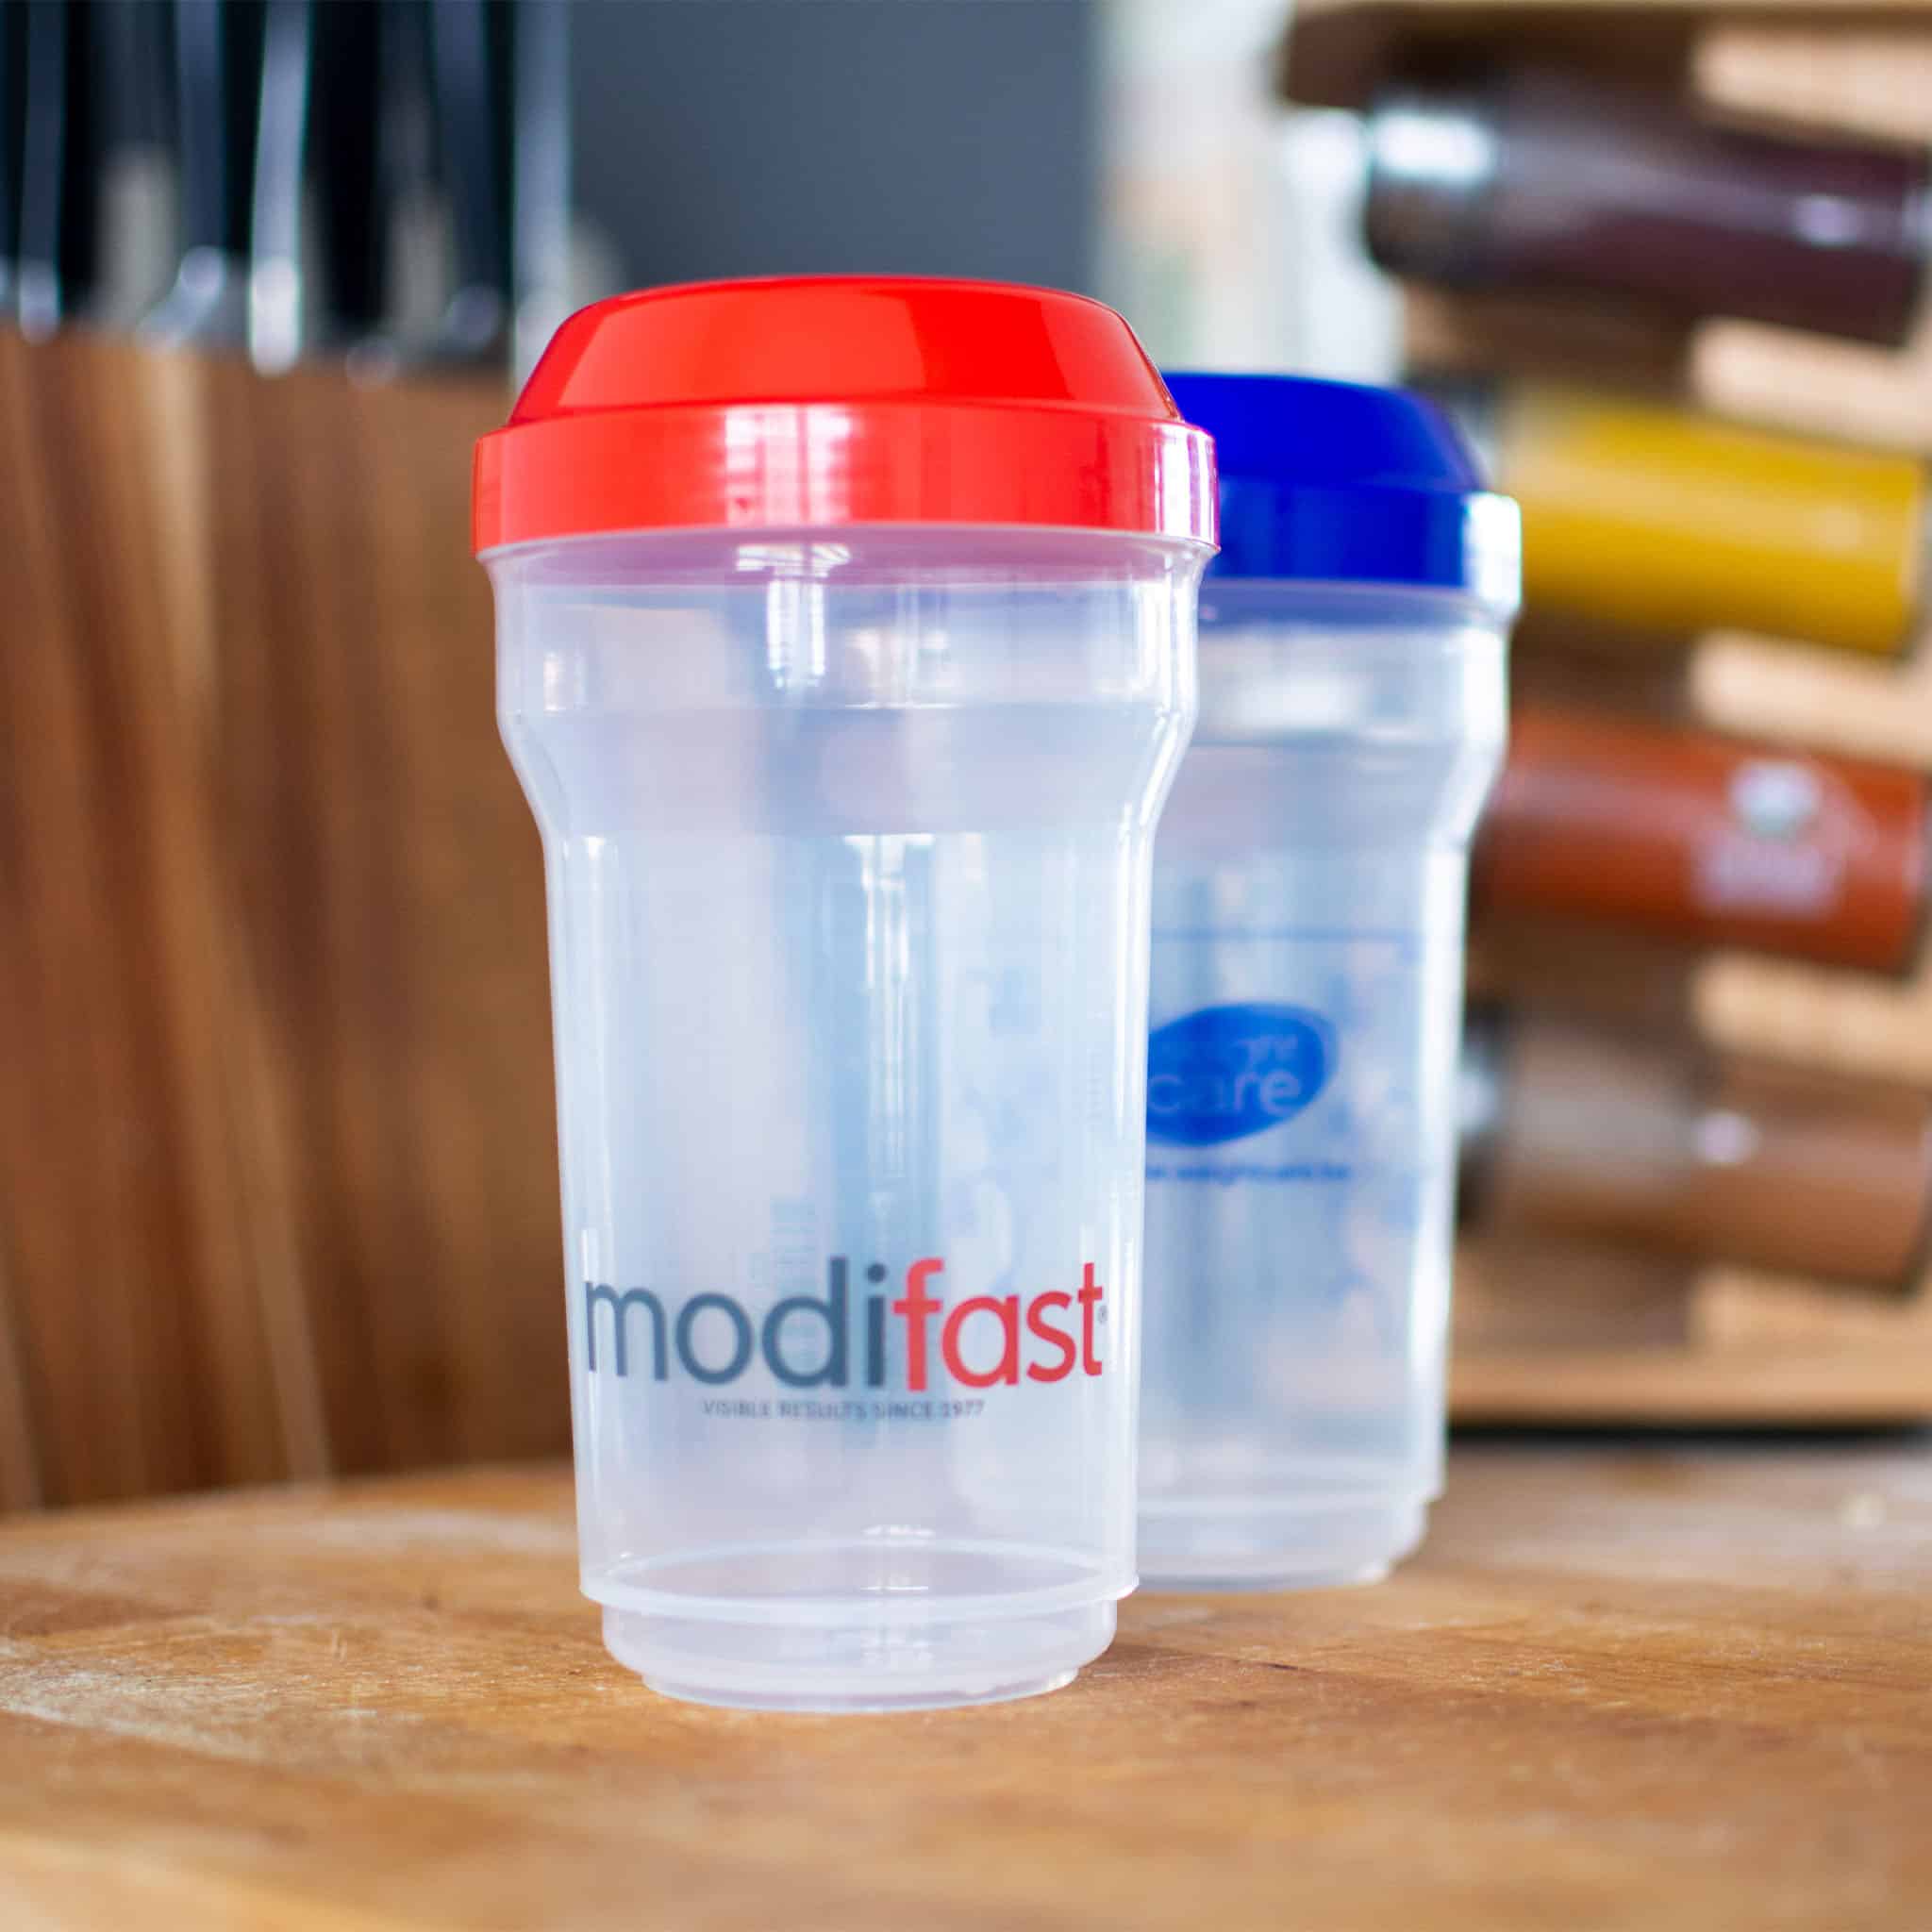 Modifast compact shakers